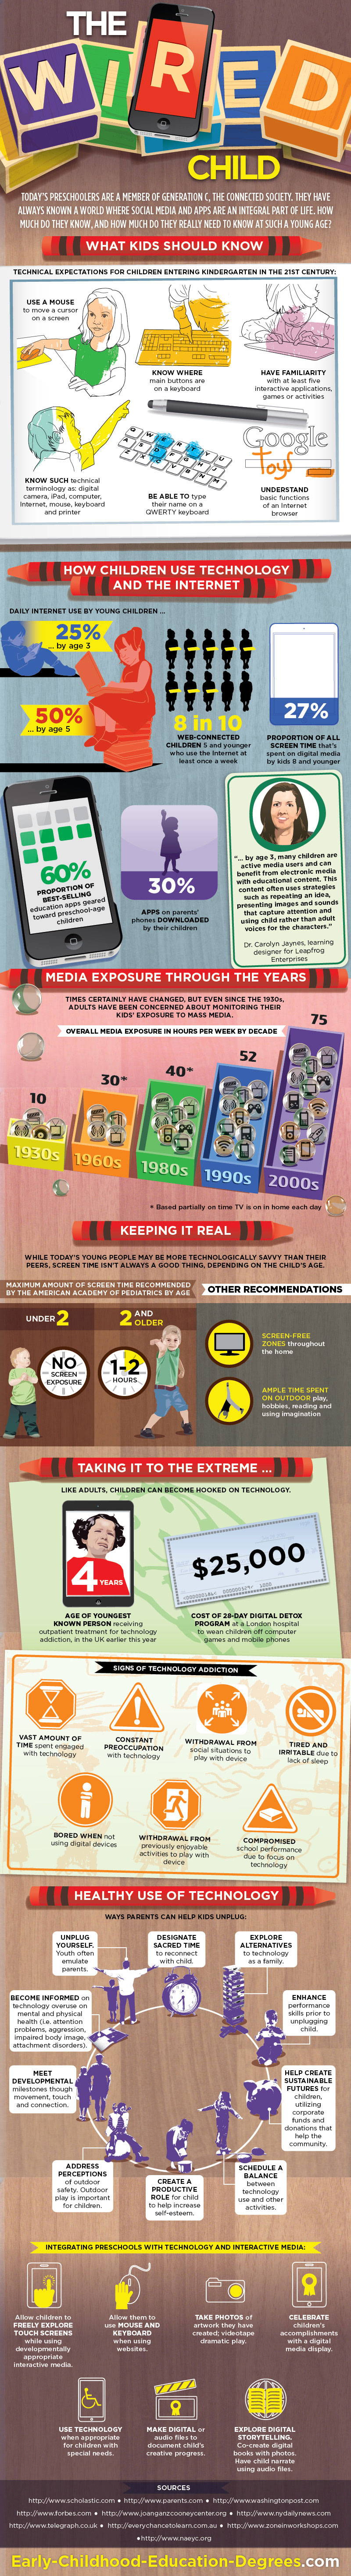 The Wired Child infographic